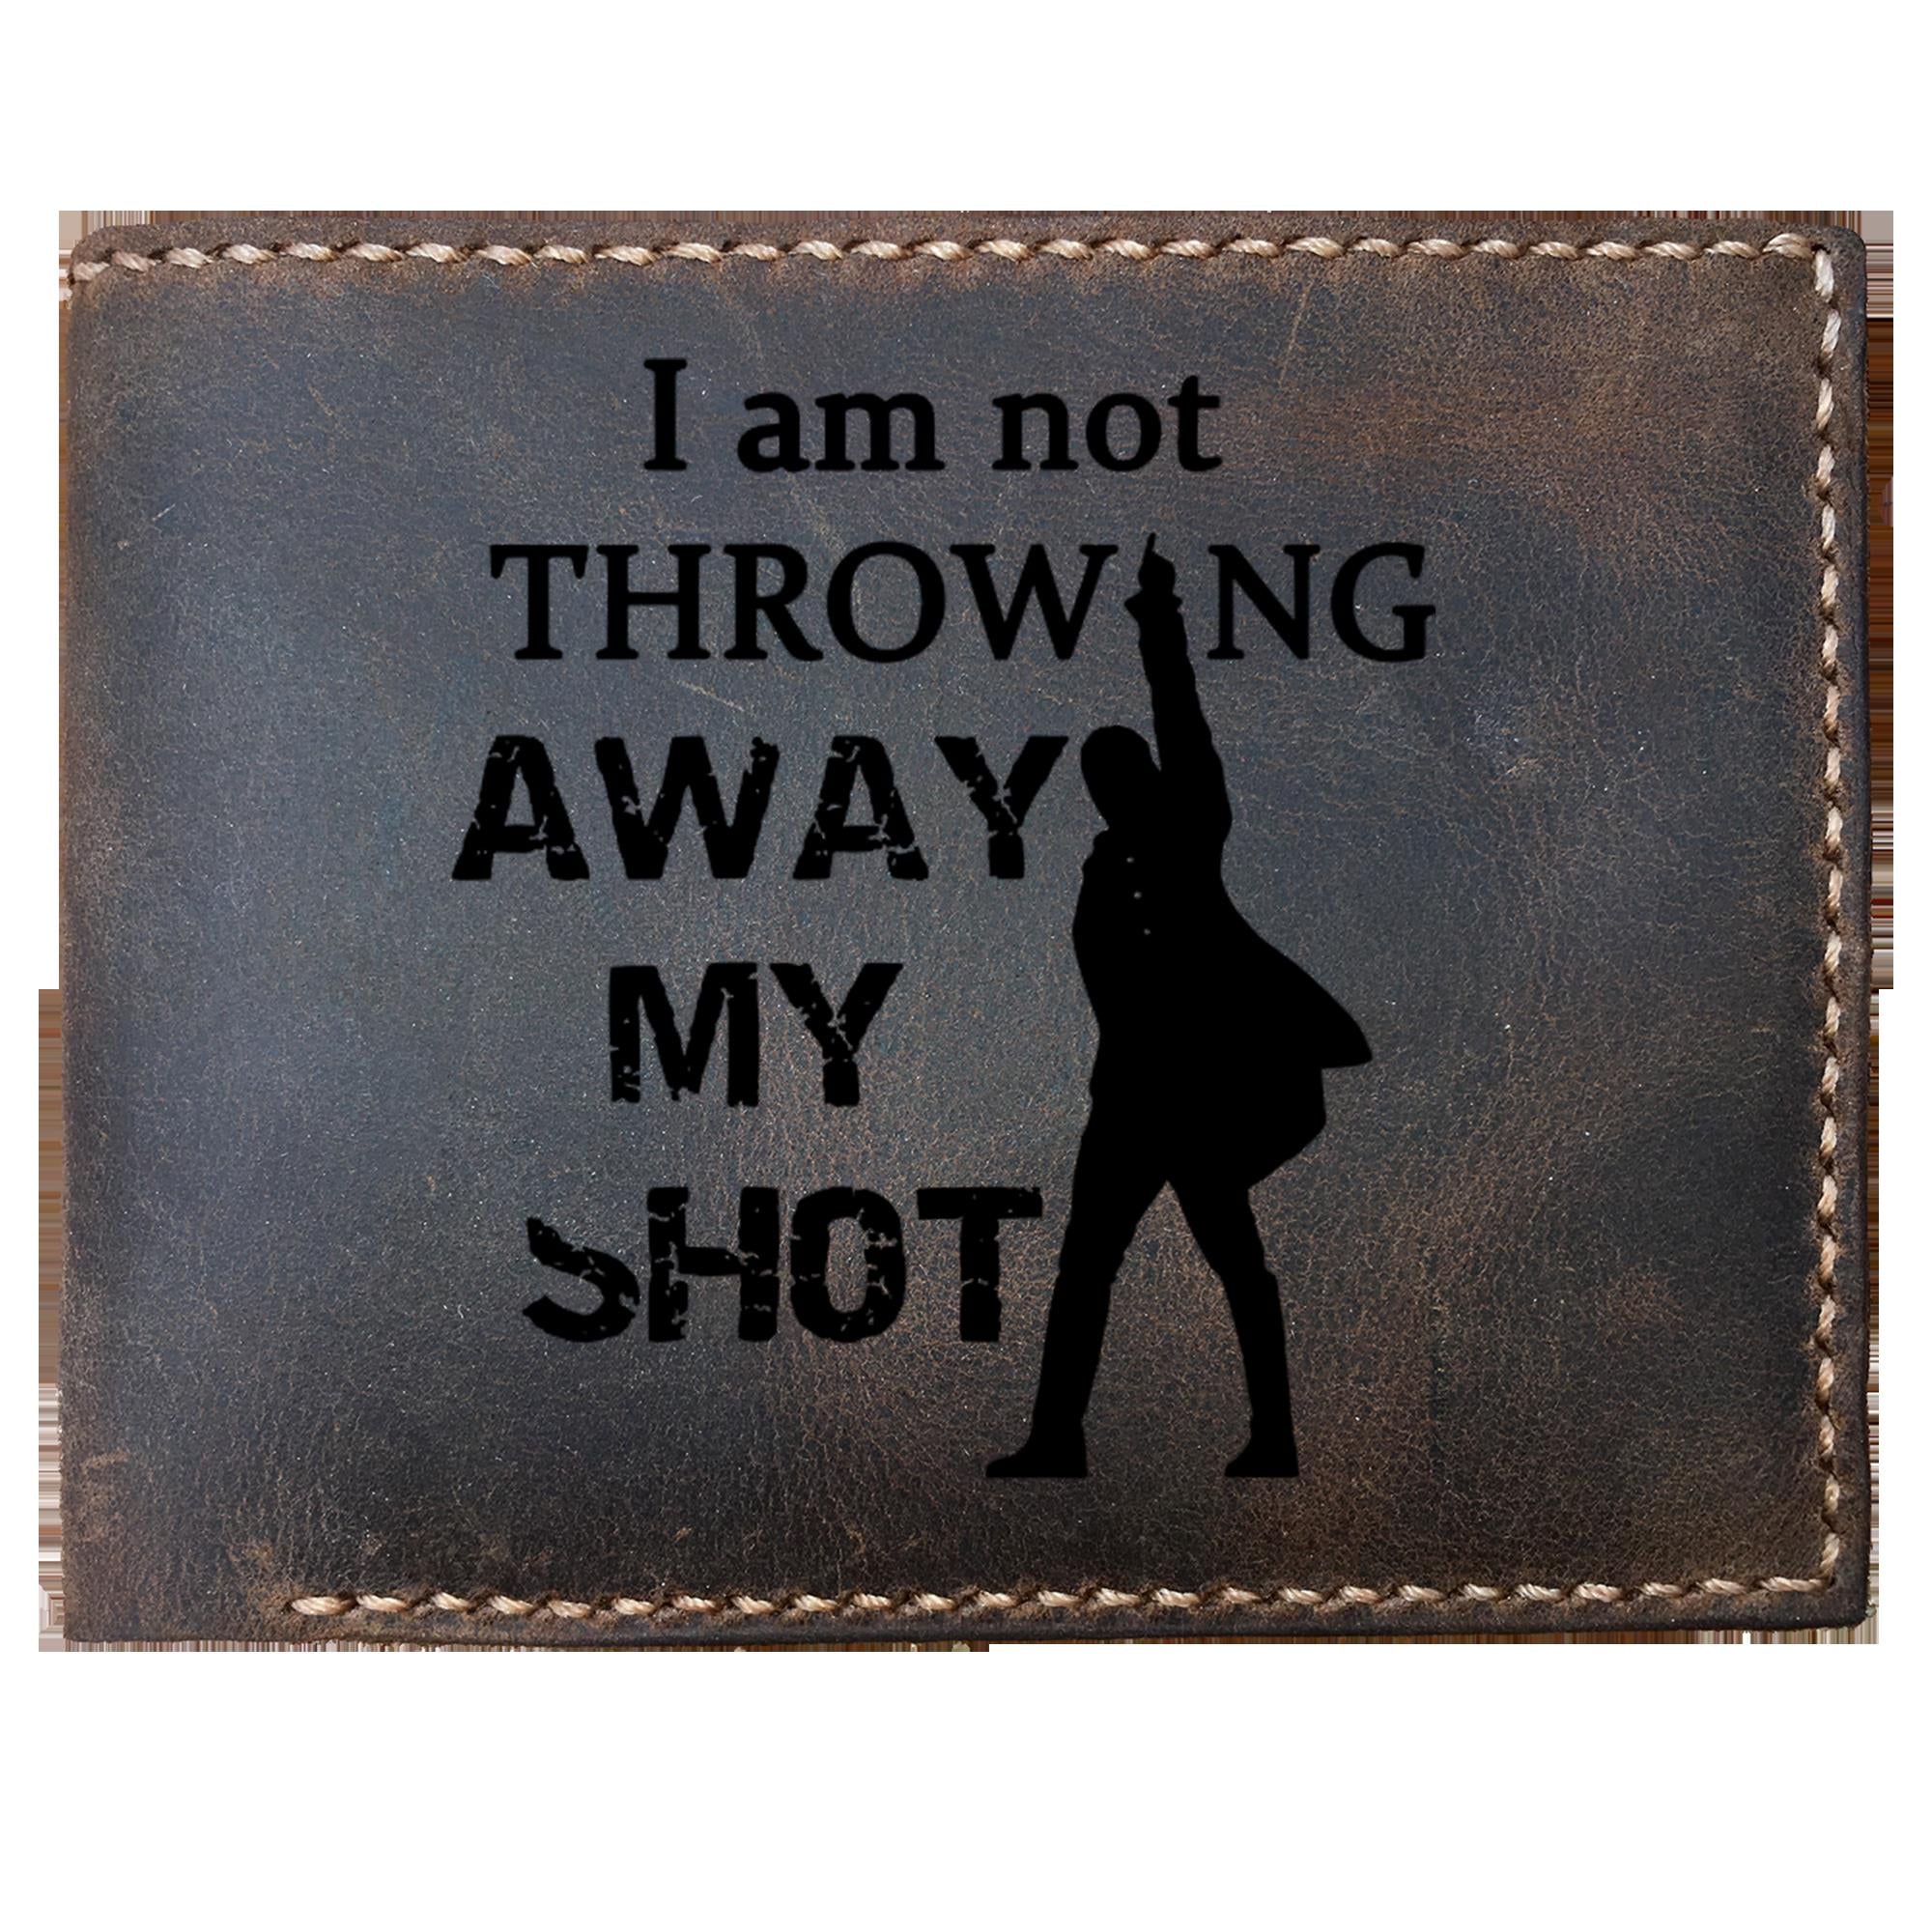 Skitongifts Funny Custom Laser Engraved Bifold Leather Wallet For Men, I Am Not Throwing Away My Shot Hamiton Funny